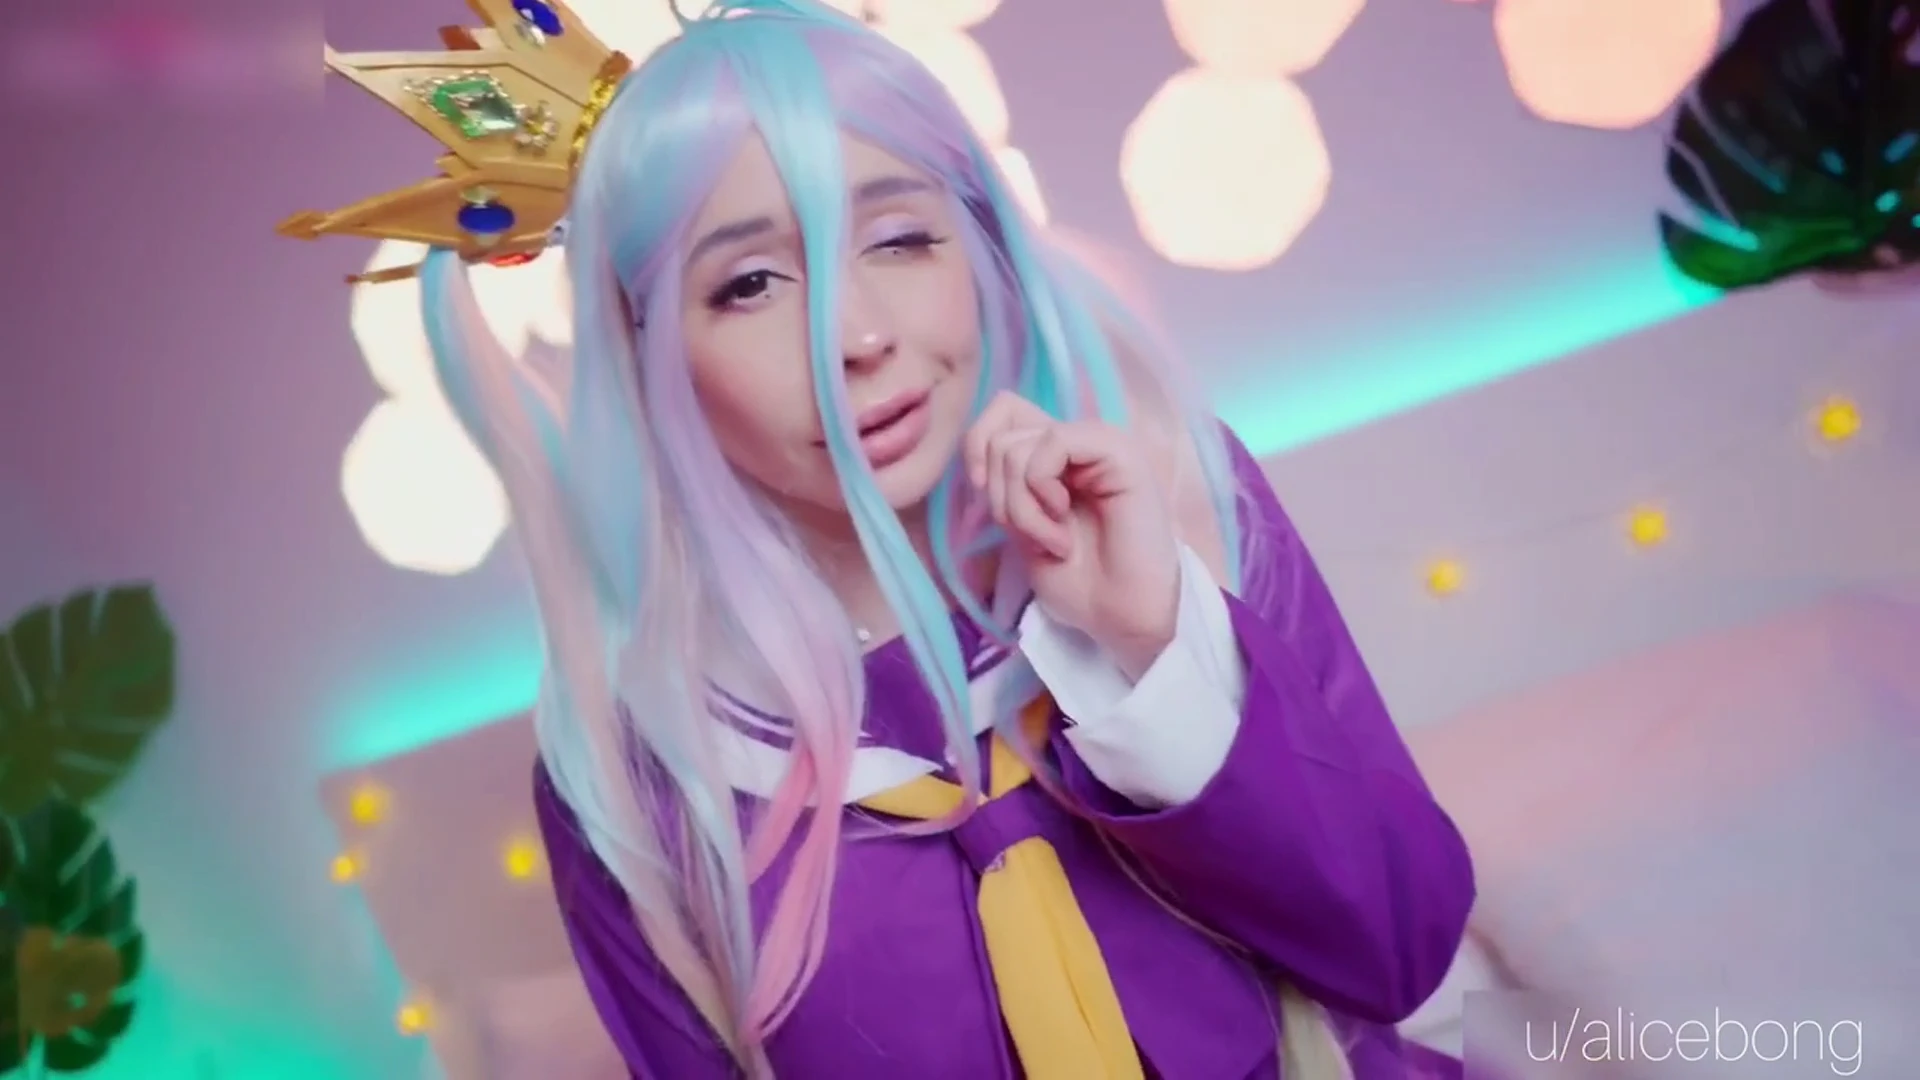 Shiro from No game no life by Alice Bong